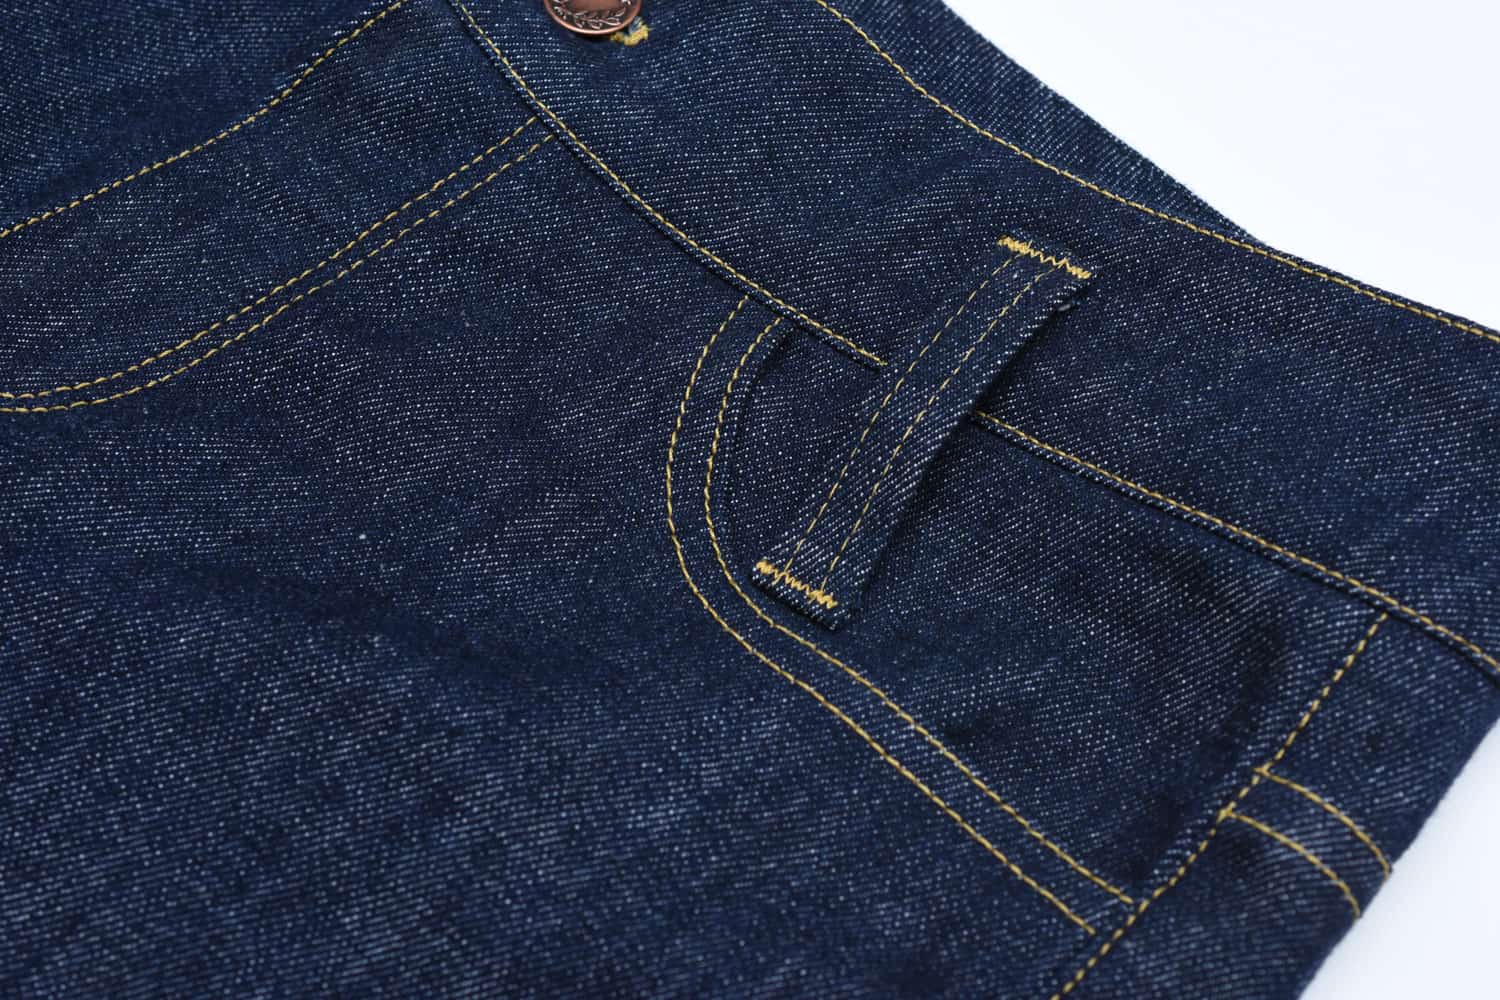 How to sew jeans front pockets the professional way